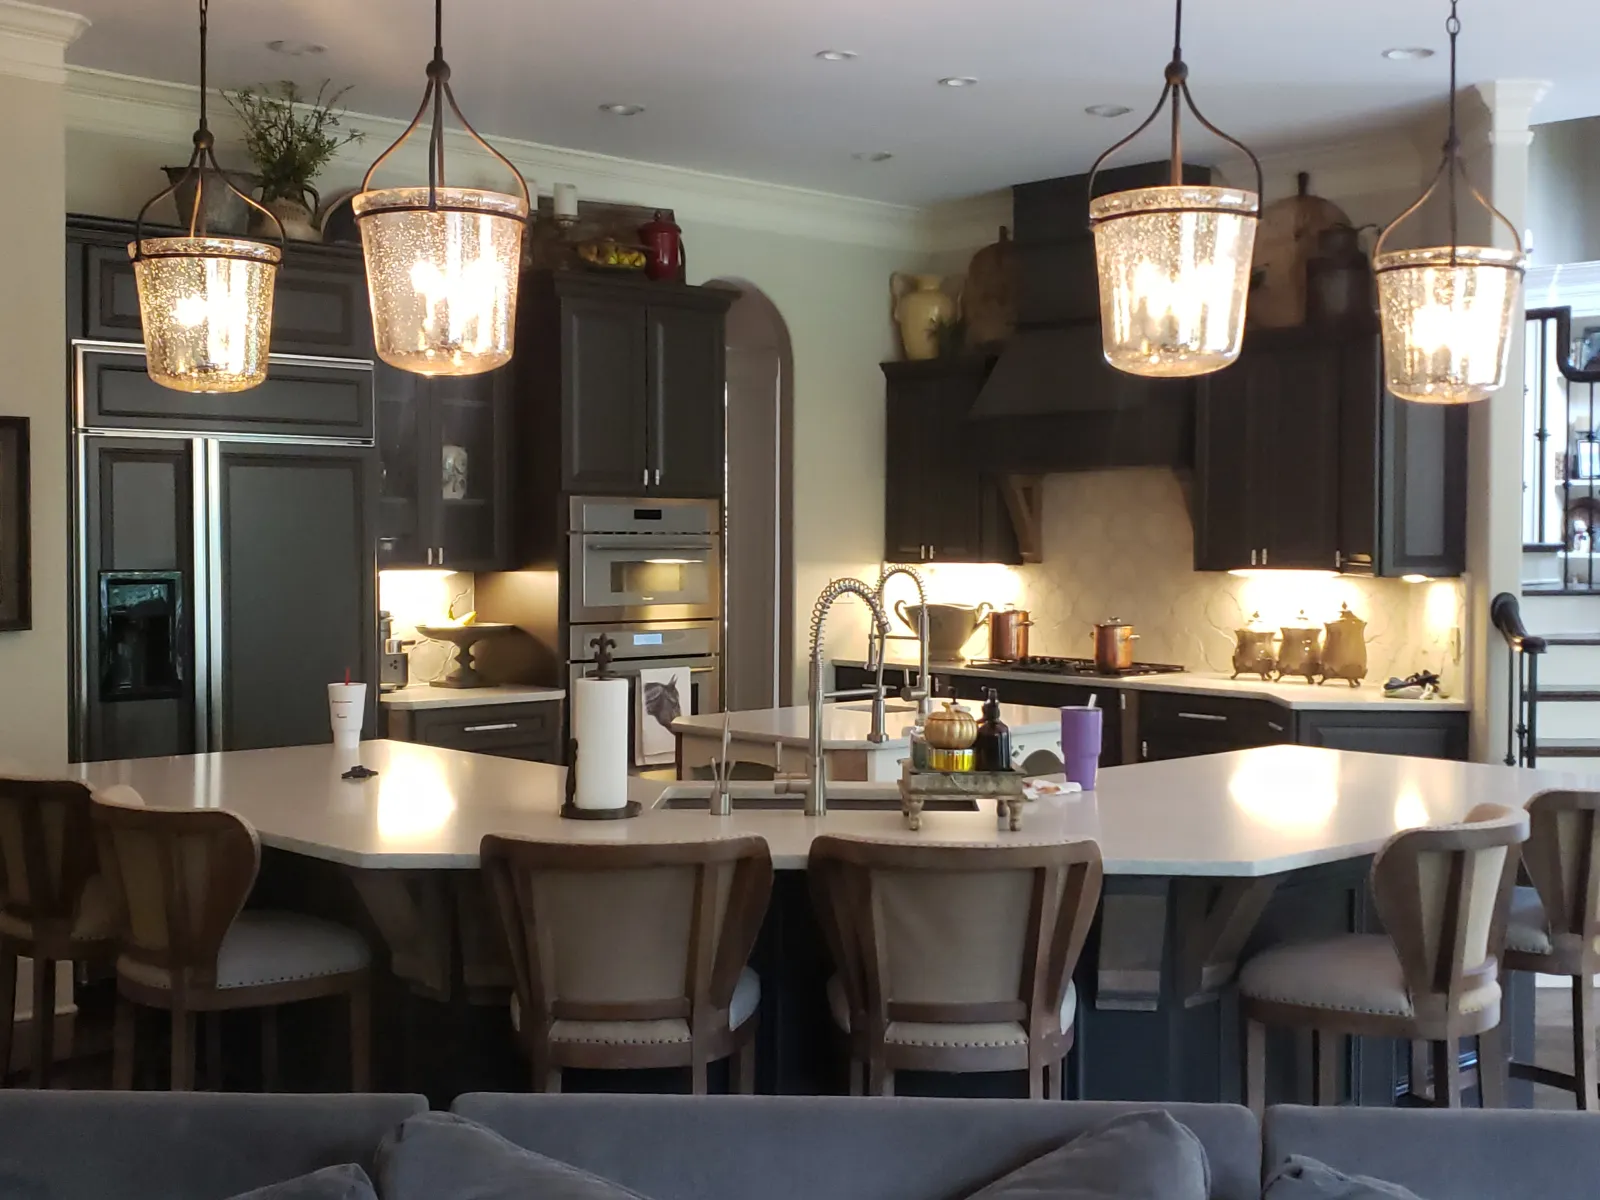 Kitchen Island Lights installed by Estes Electricians